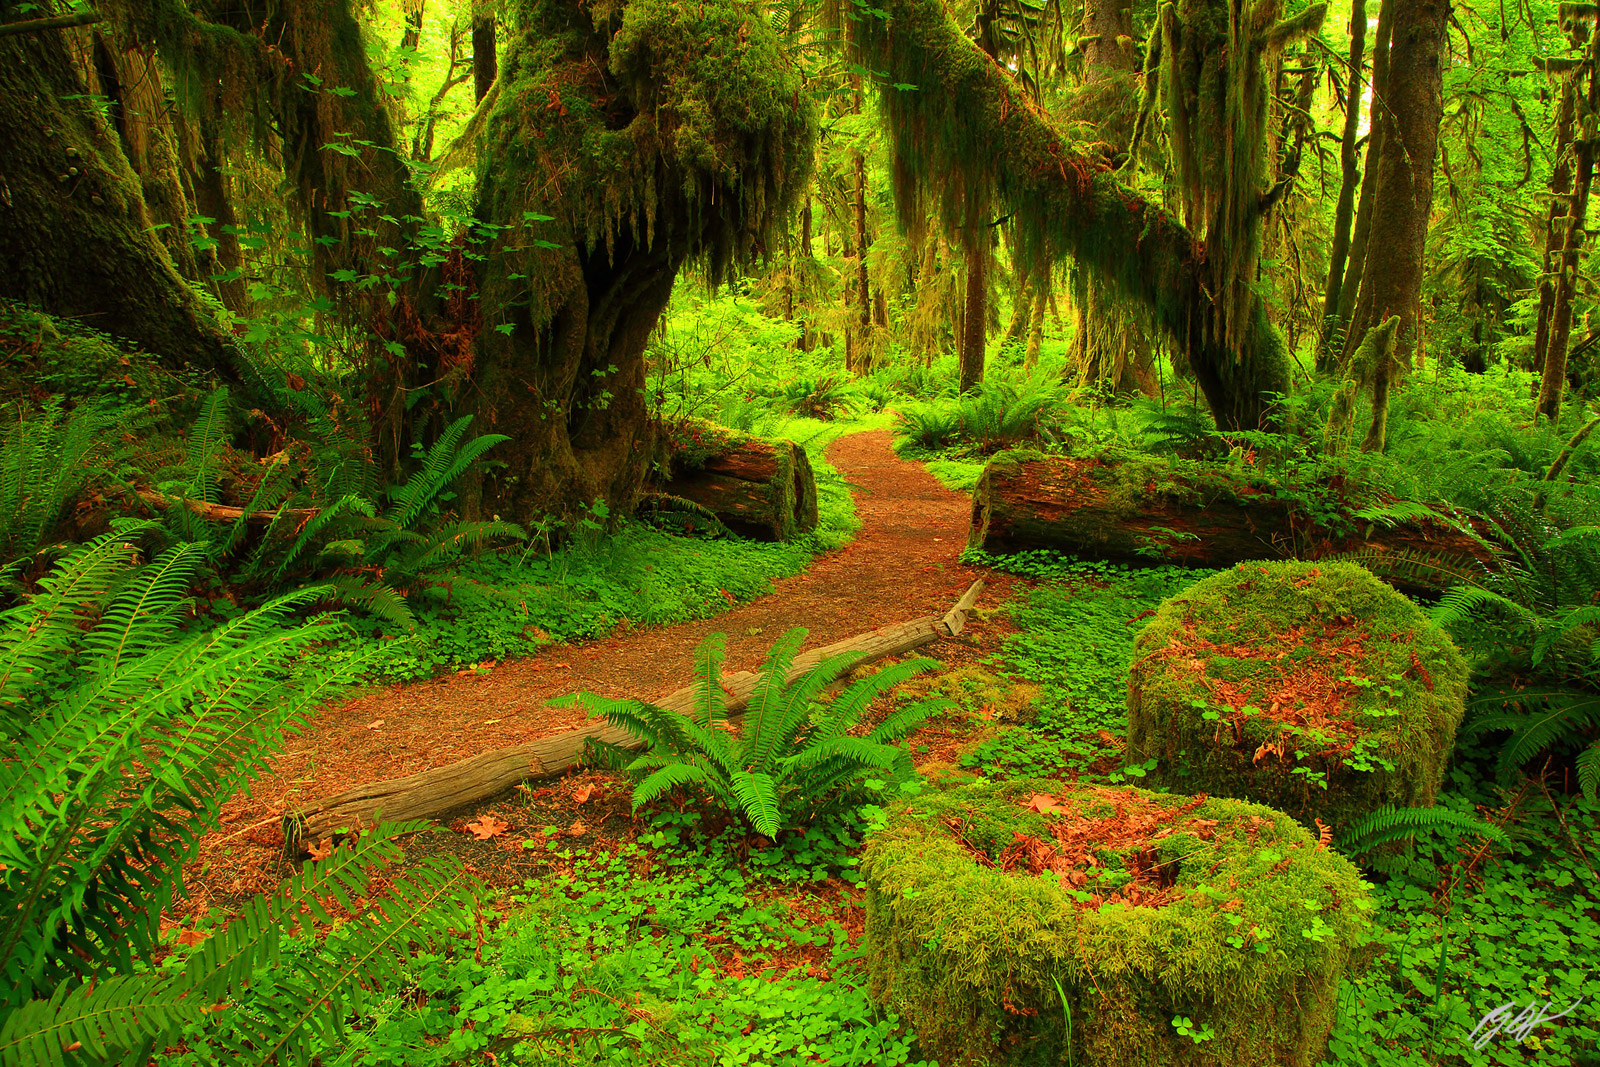 Maple Glade Trail in Quinault Rainforest in Olympic National Park, Washington